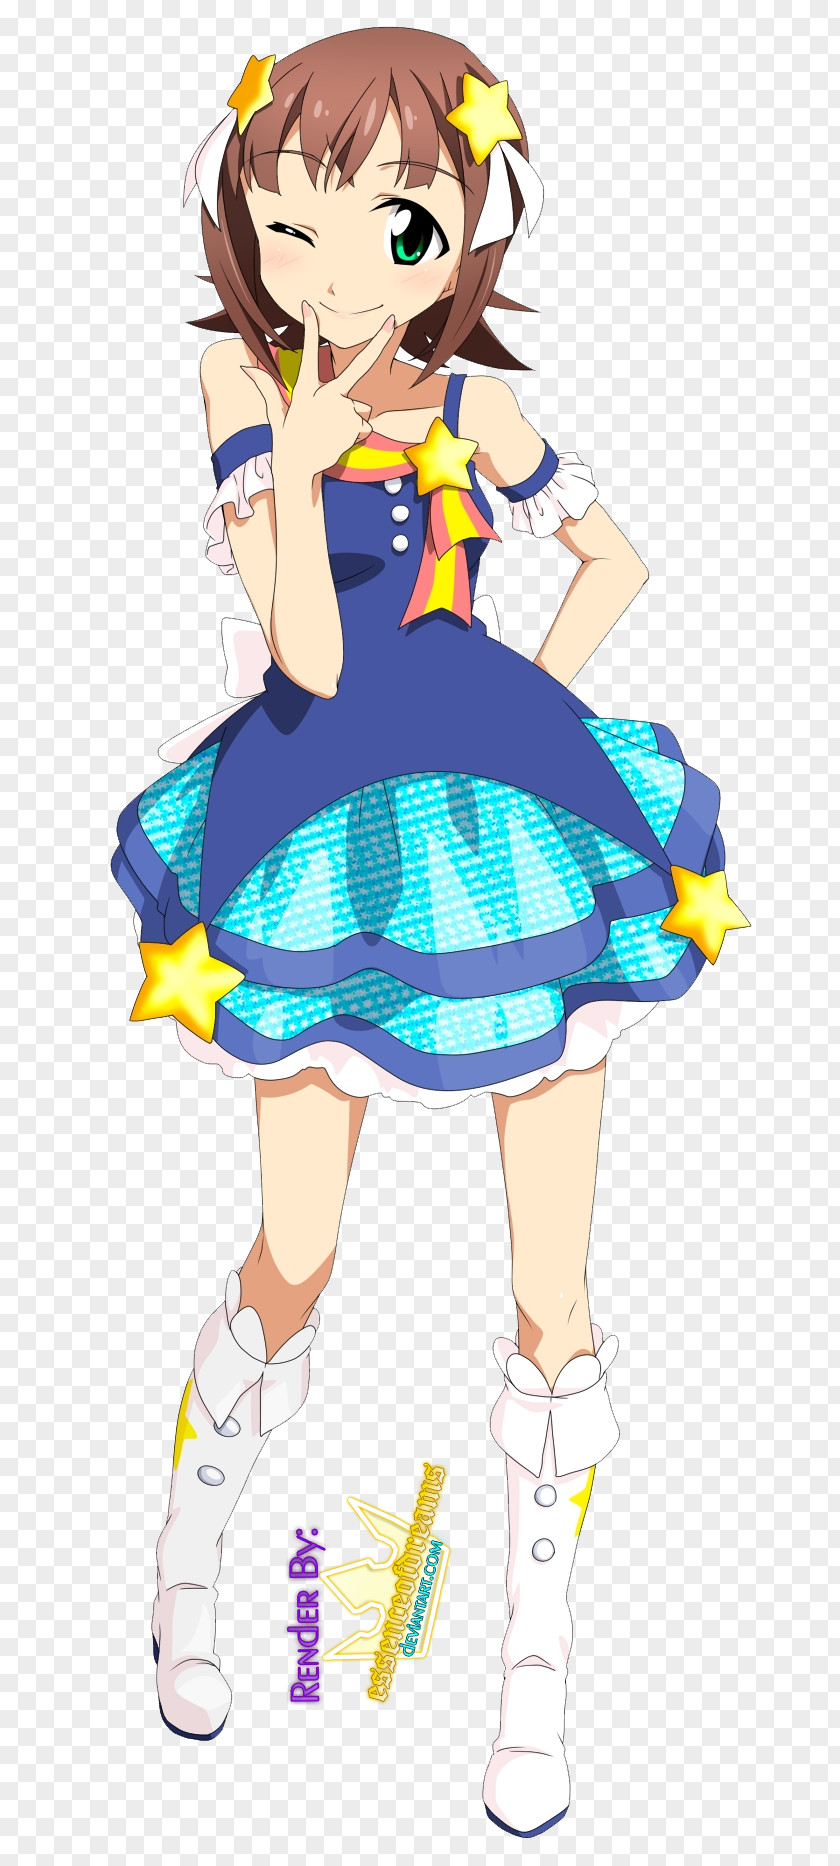 Haruka Amami The Idolmaster Rendering THE IDOLM@STER PNG